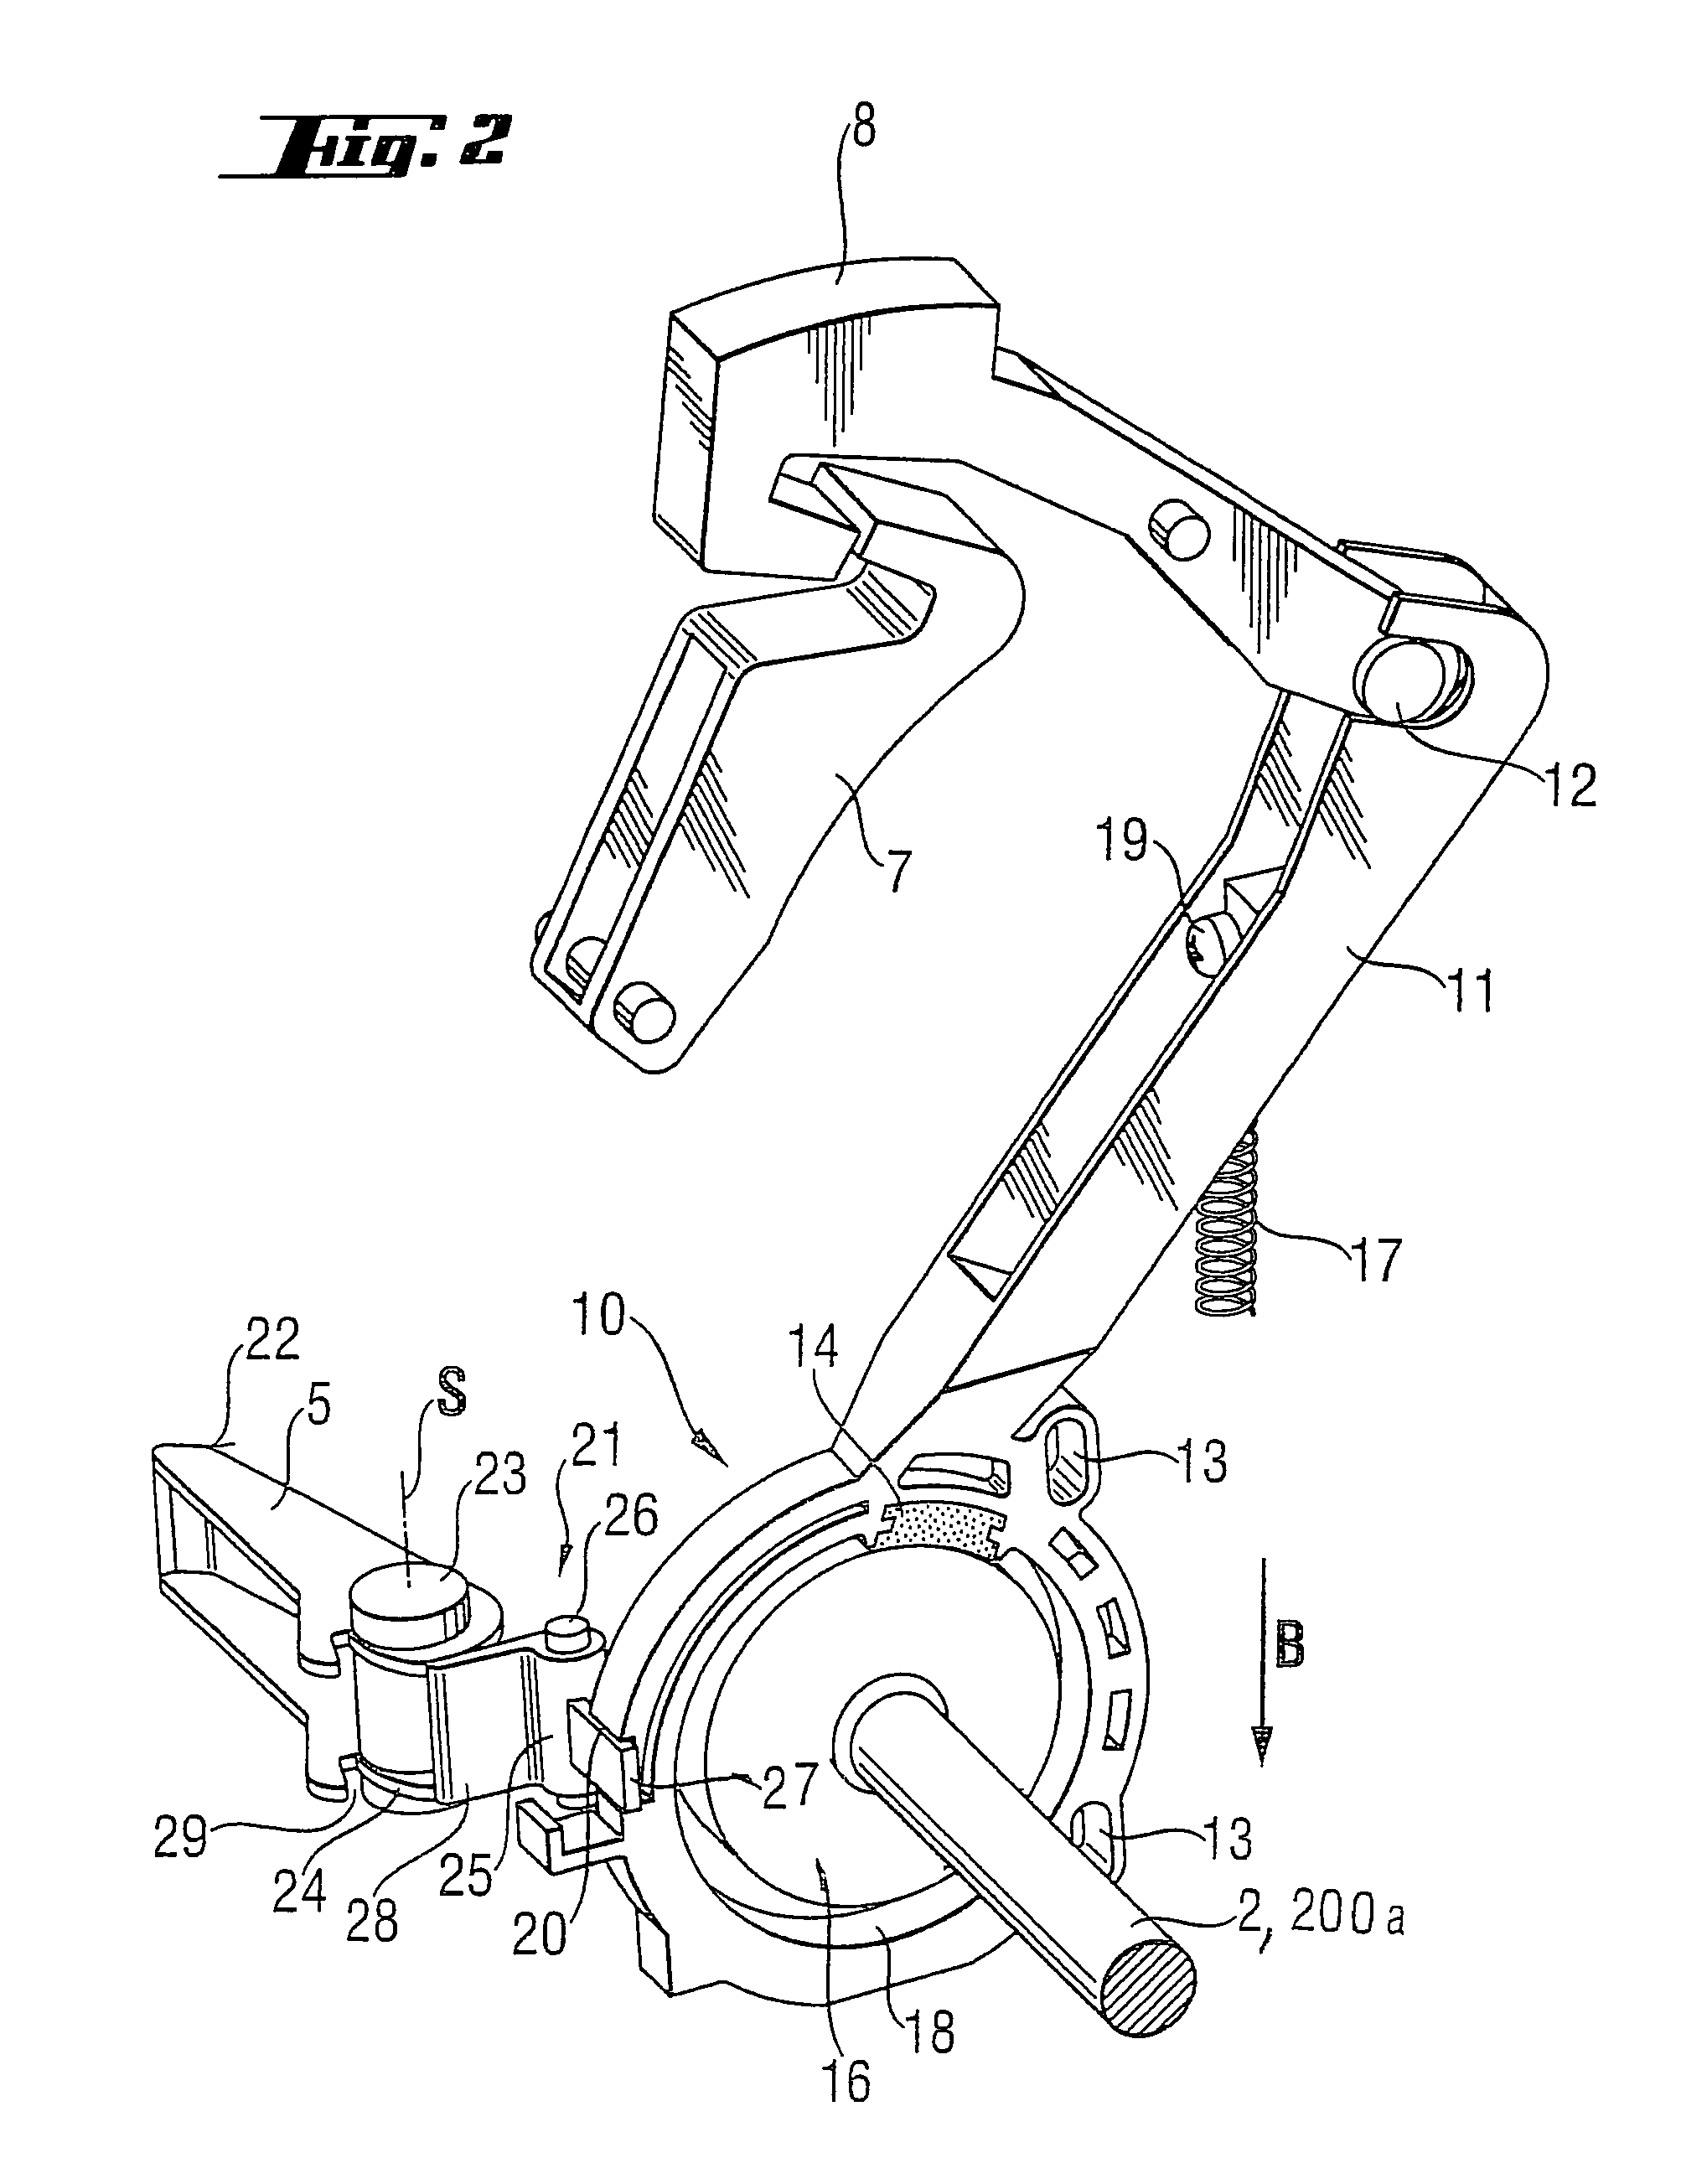 Electrical power tool with a rotatable working tool